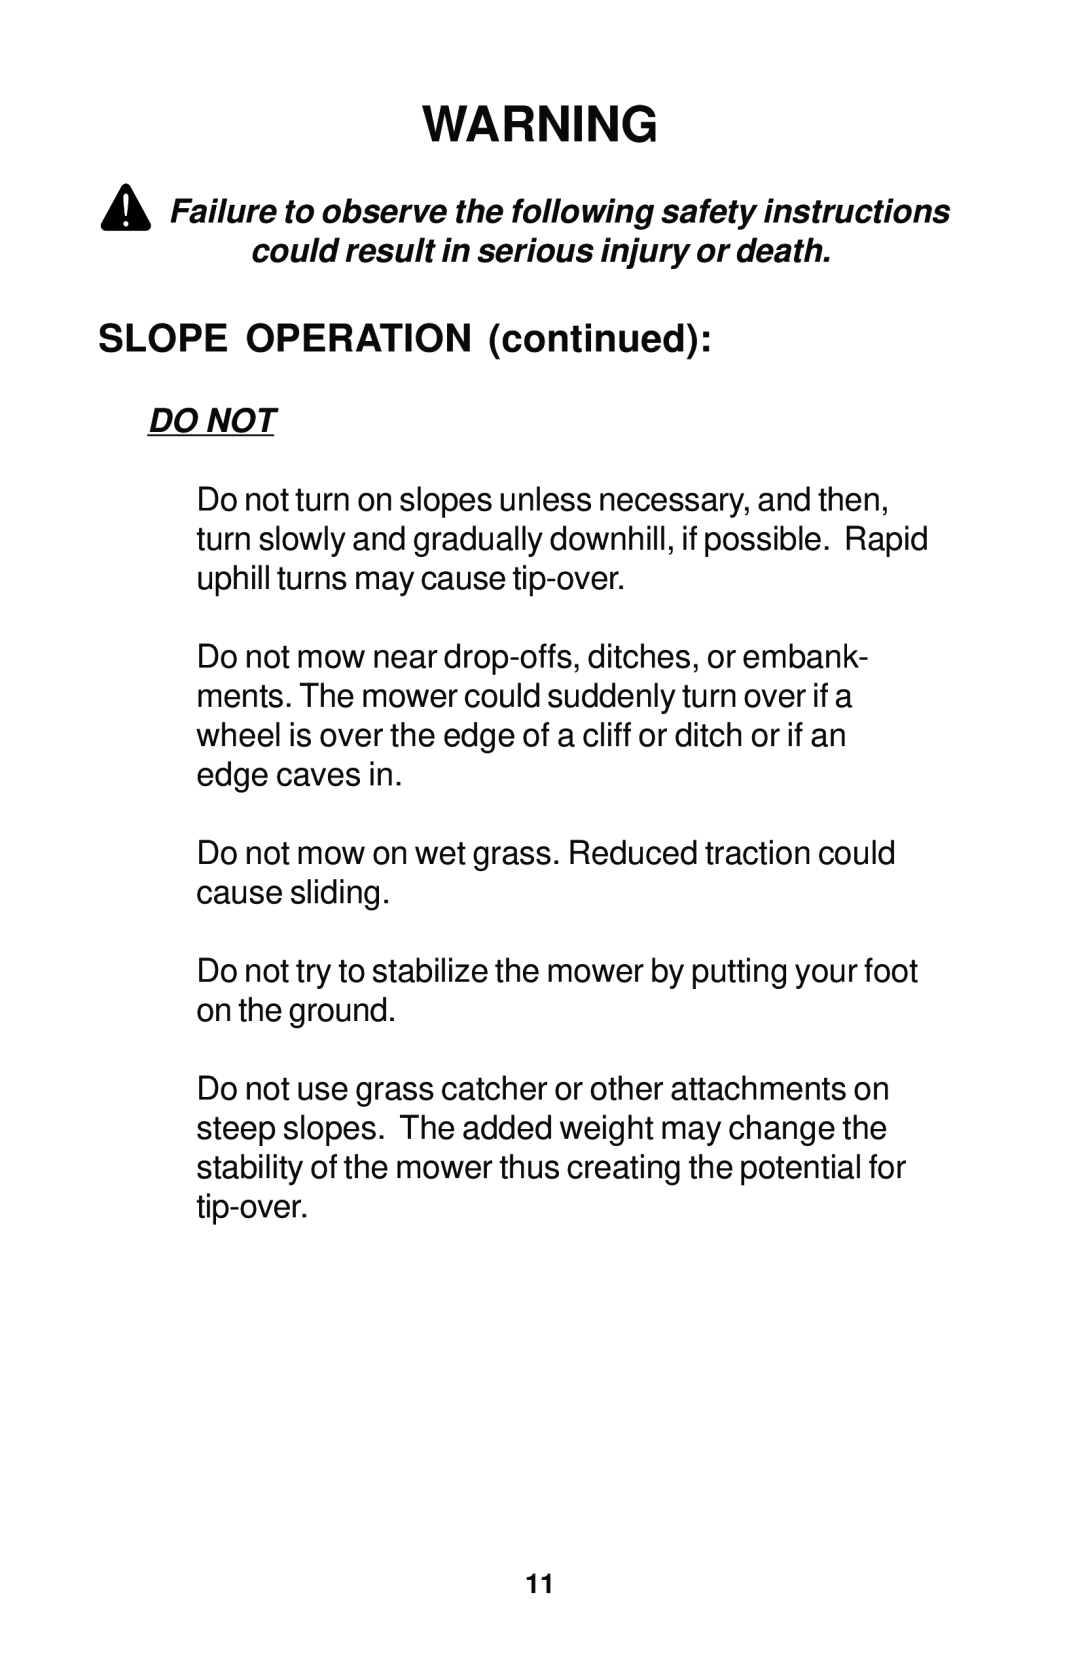 Dixon 12881-1104 manual SLOPE OPERATION continued, Do not mow on wet grass. Reduced traction could cause sliding 